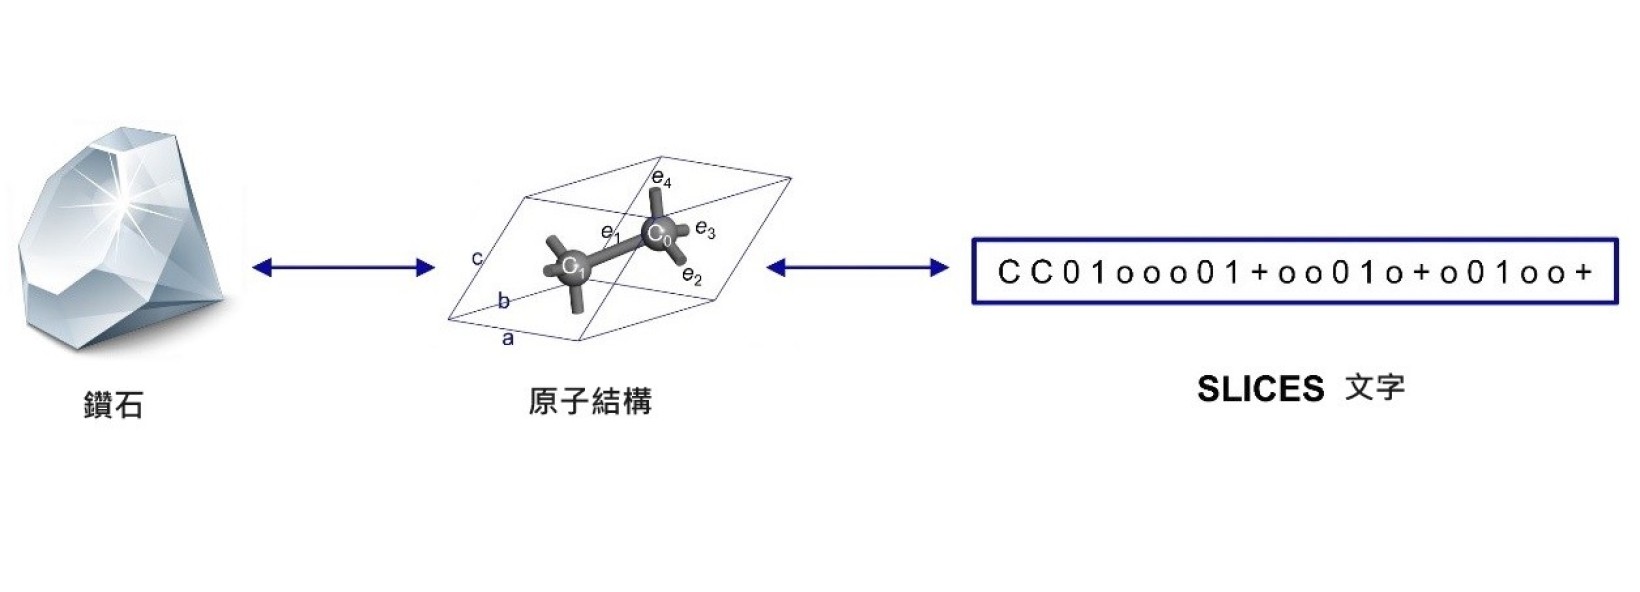 Lingnan makes debut in ‘Nature Communications’ scientific journal with groundbreaking crystal language for new AI energy materials